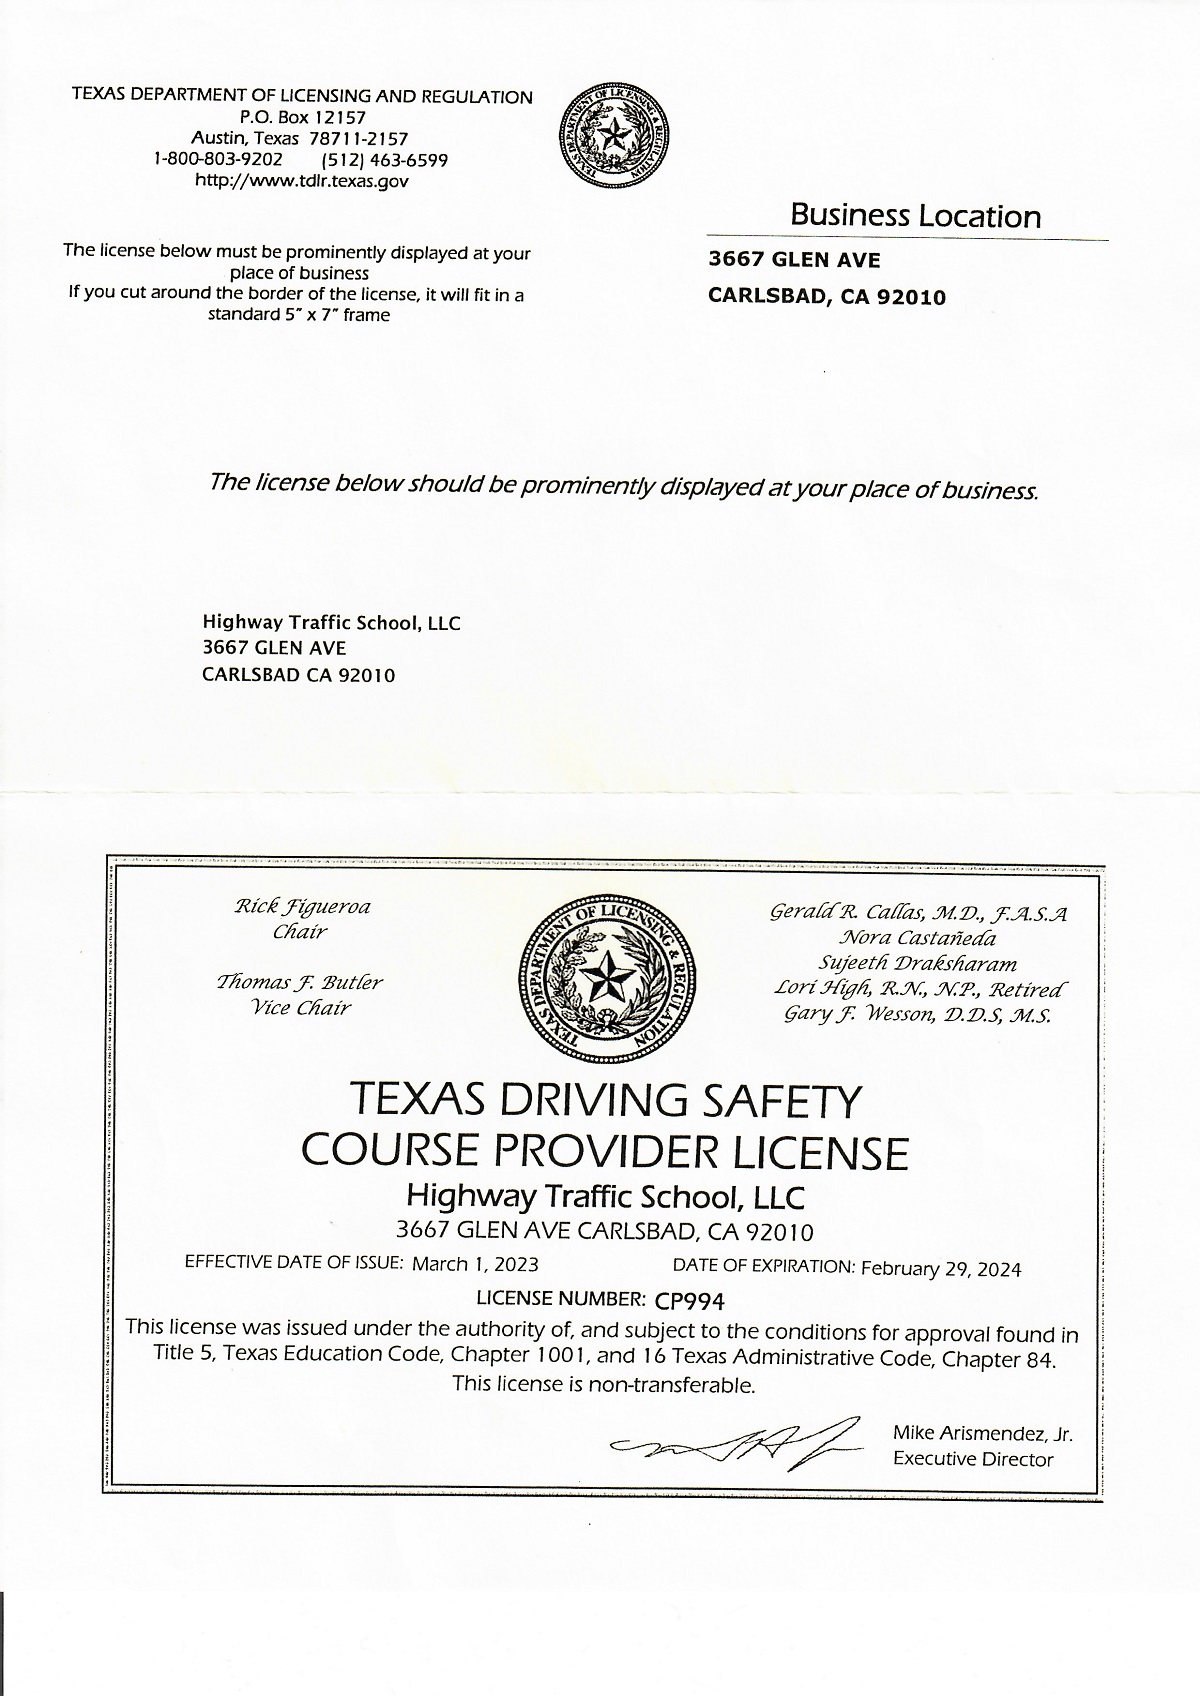 Texas TDLR Driving Safety license